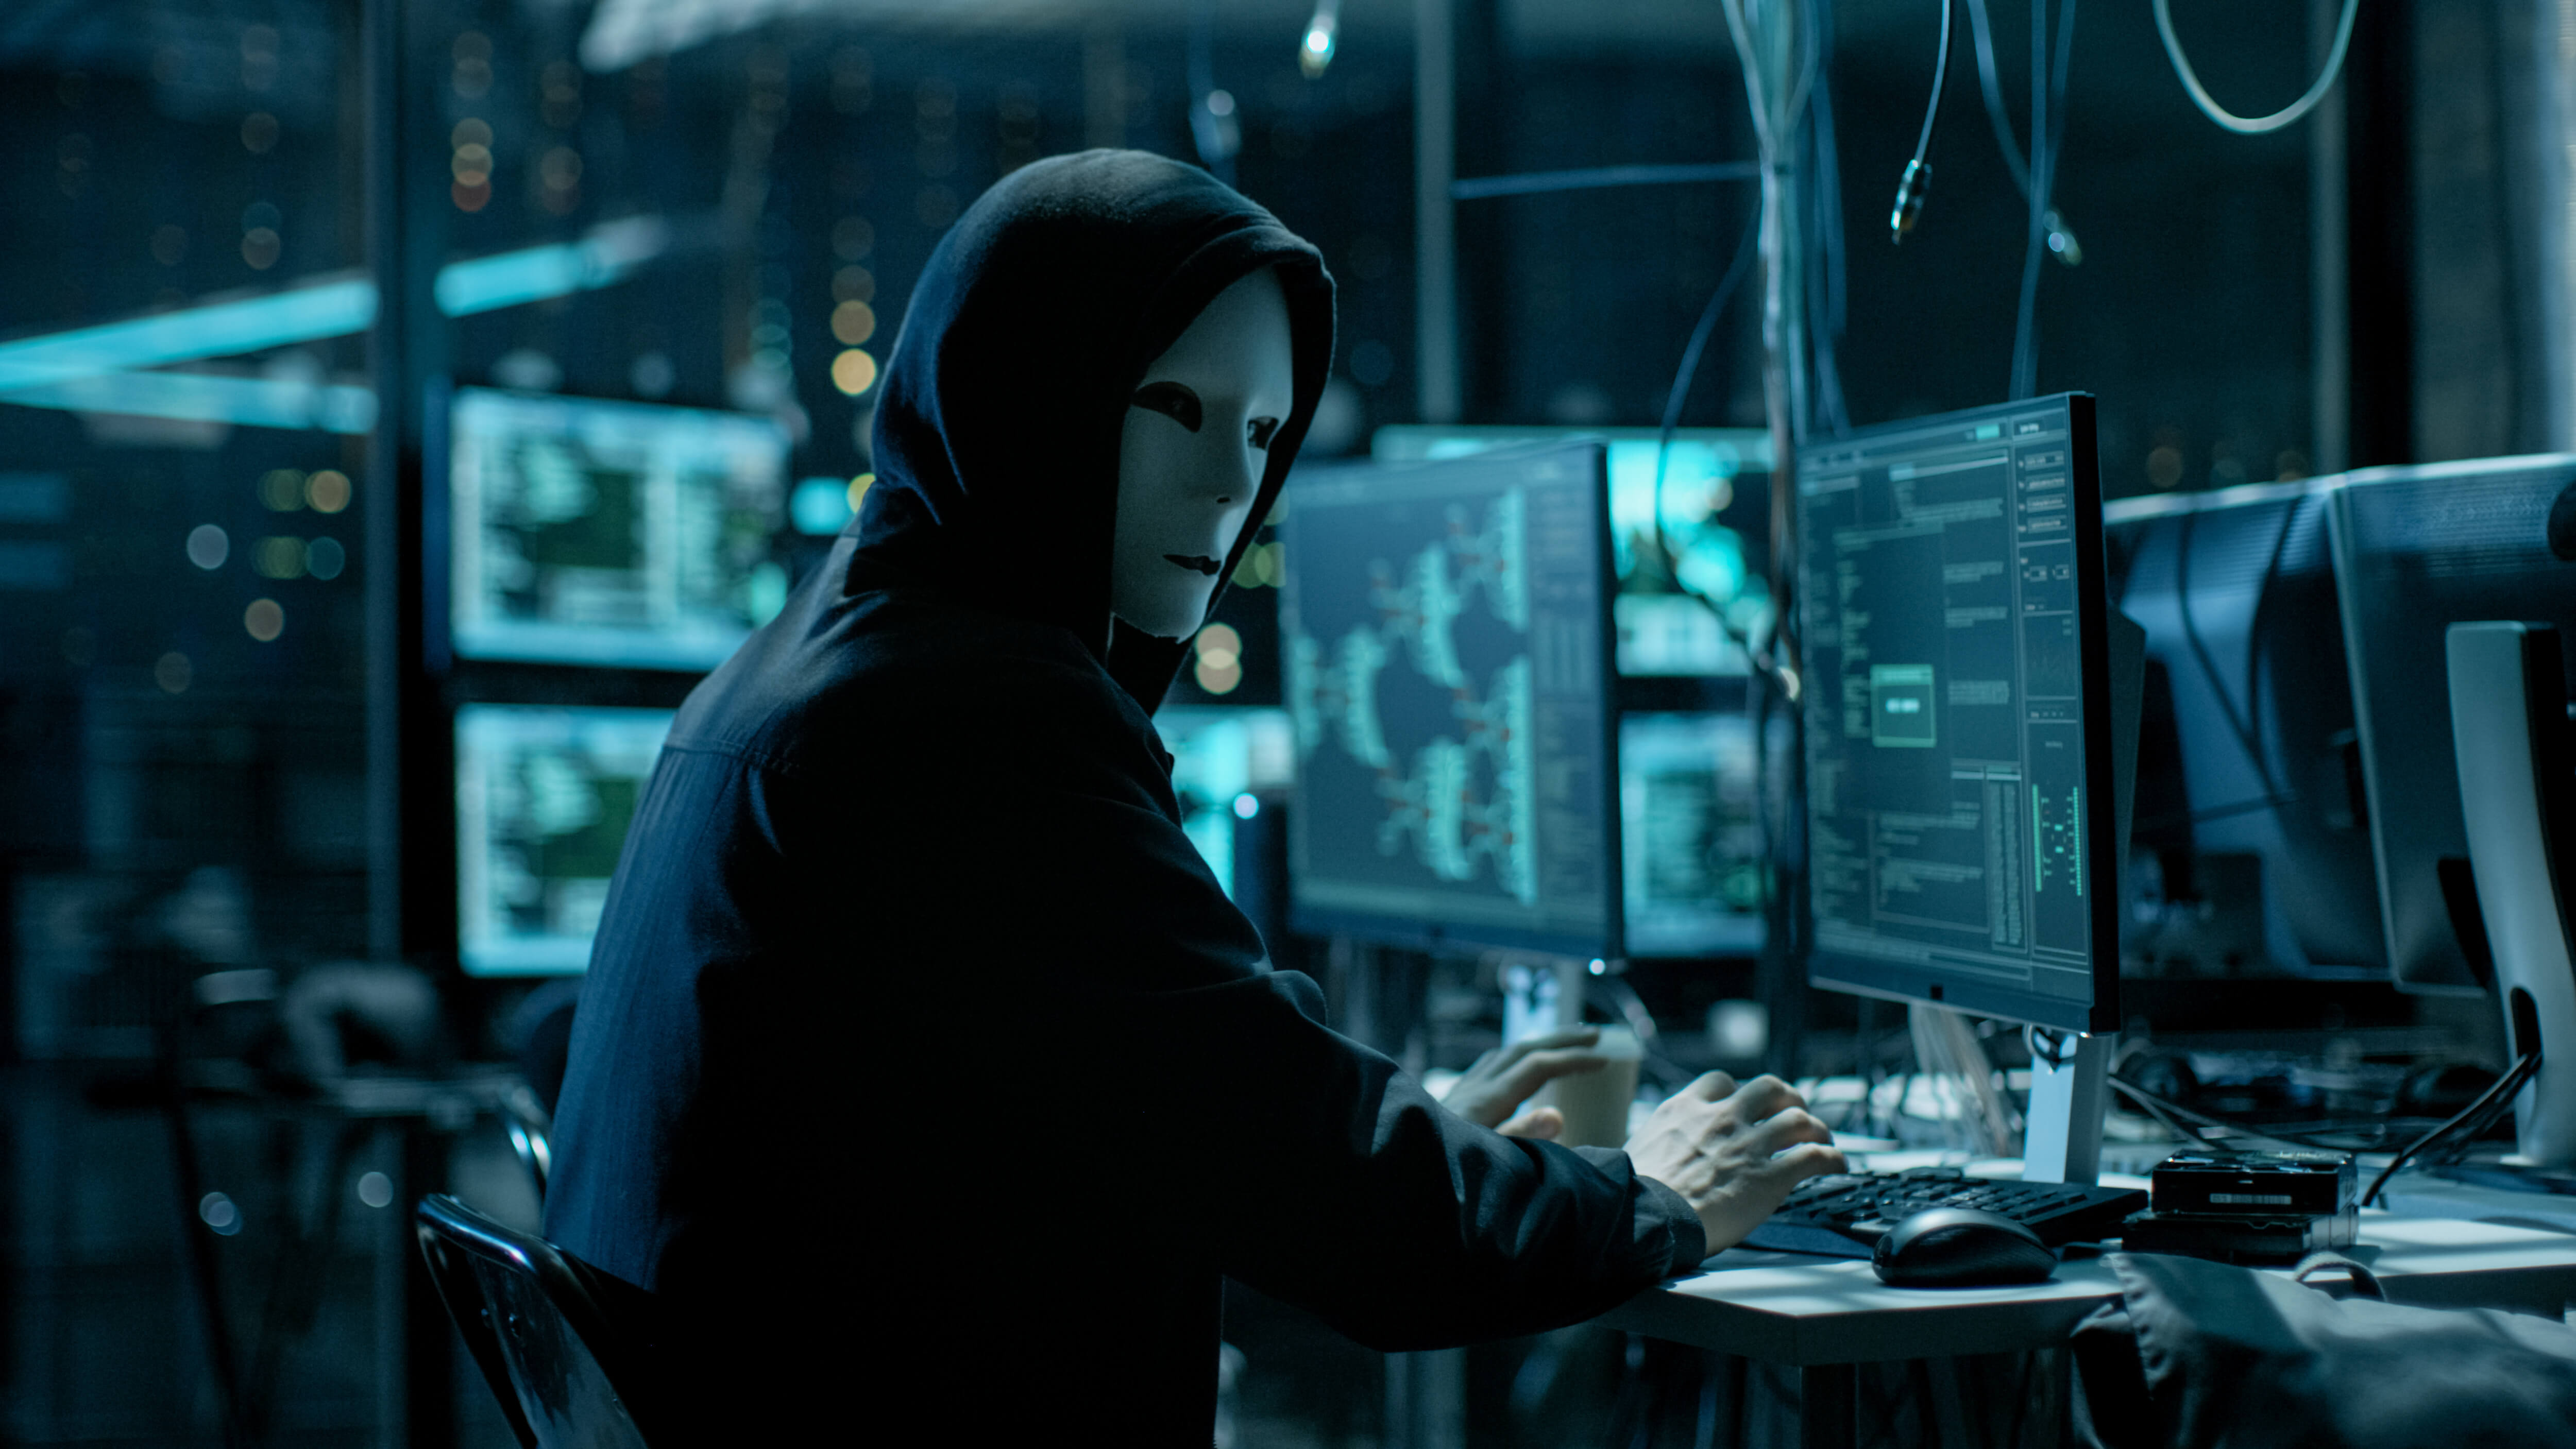 masked hooded figure glancing over their shoulder while using a computer amongst others in a dark facility